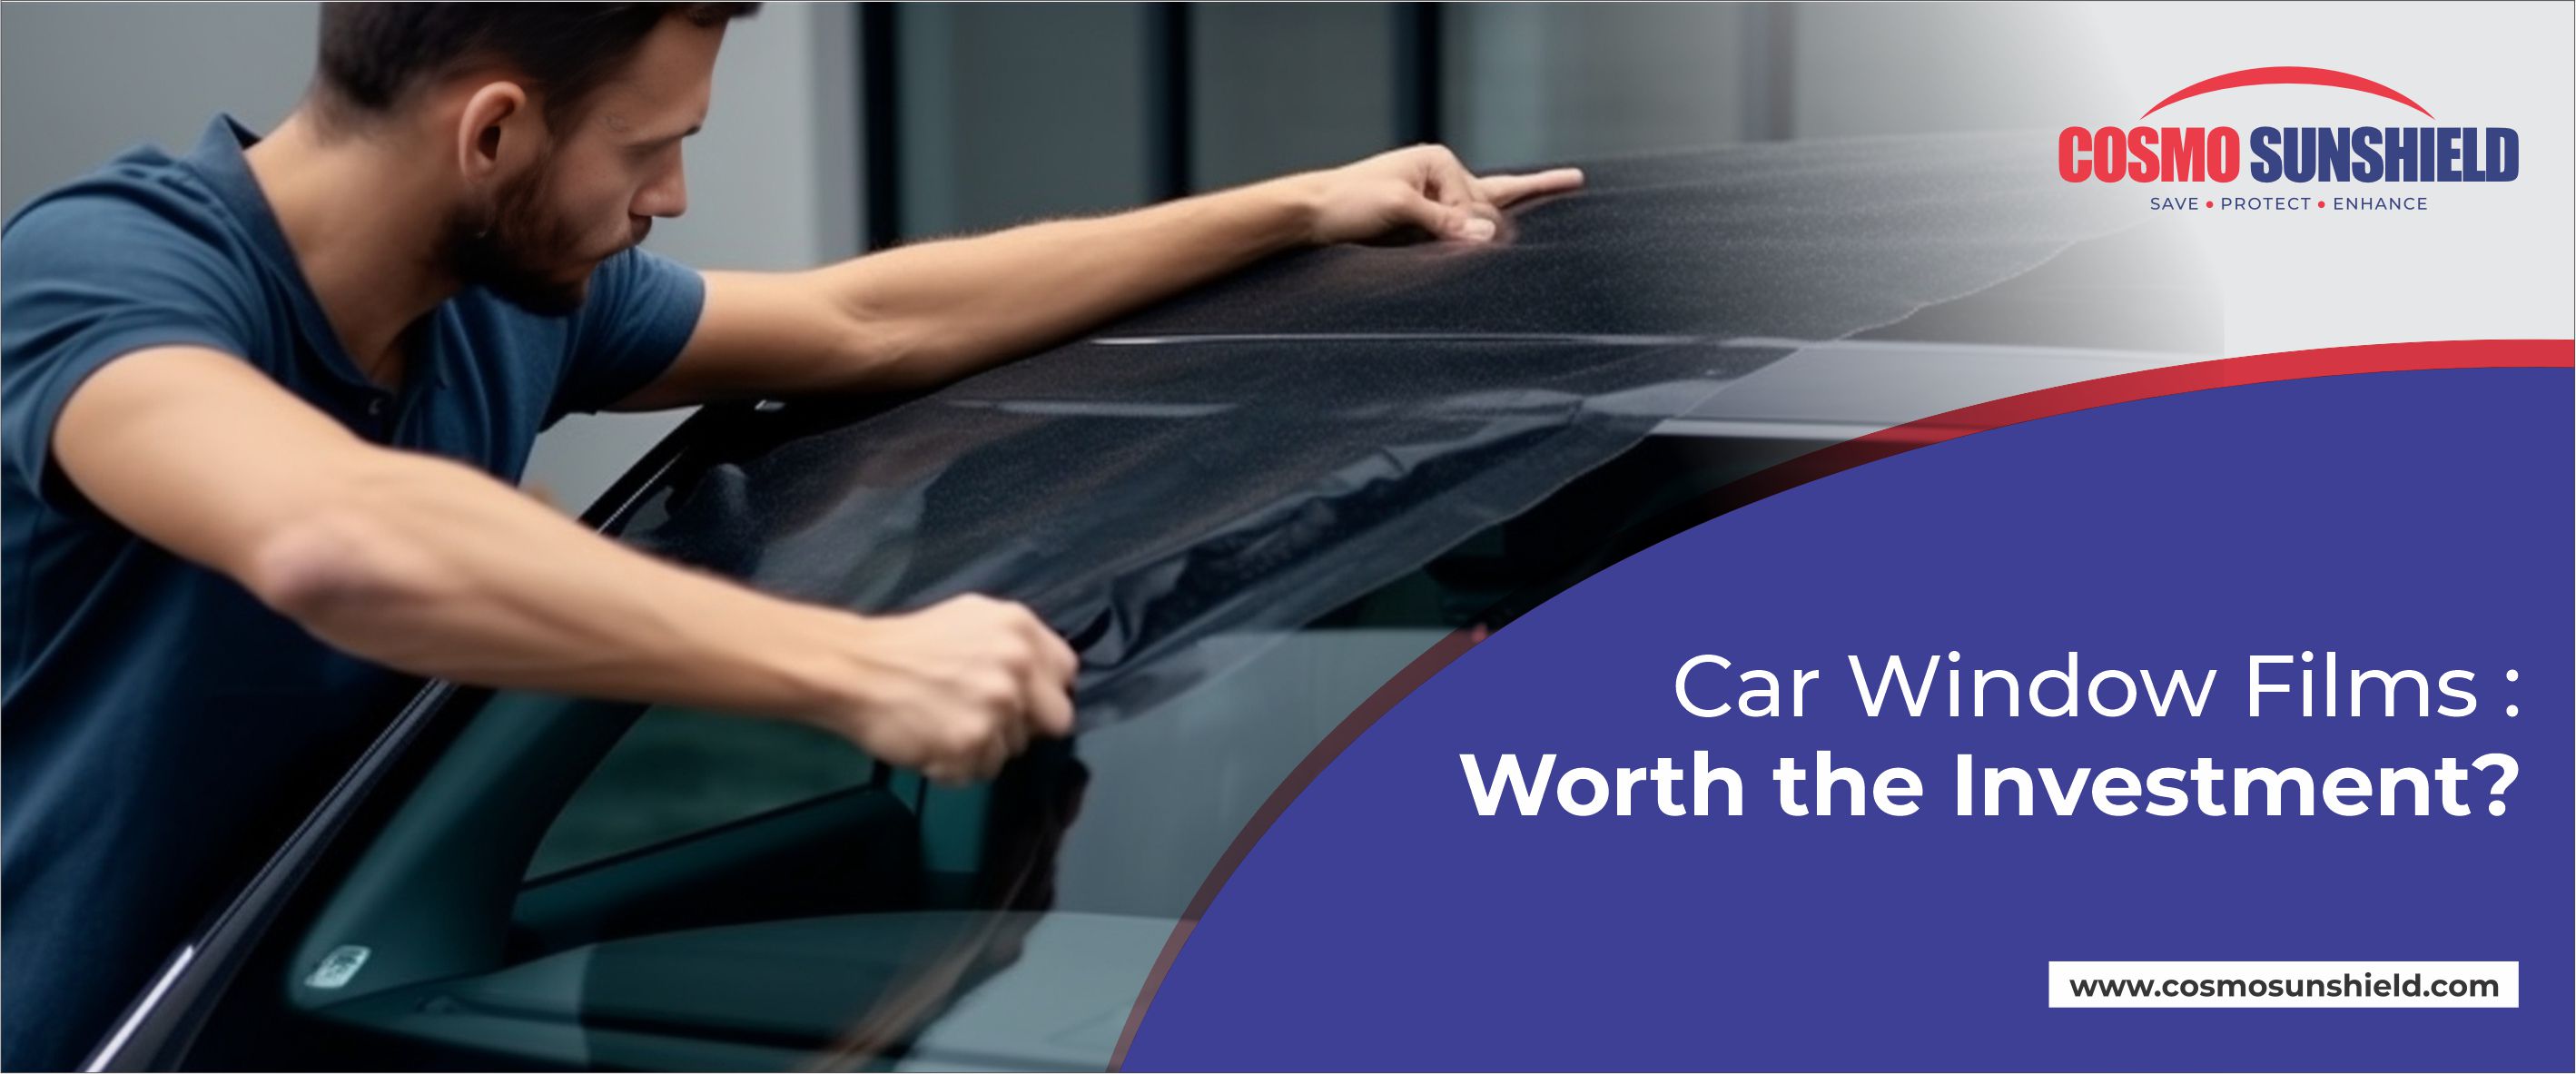 Car Window Films: Worth the Investment?